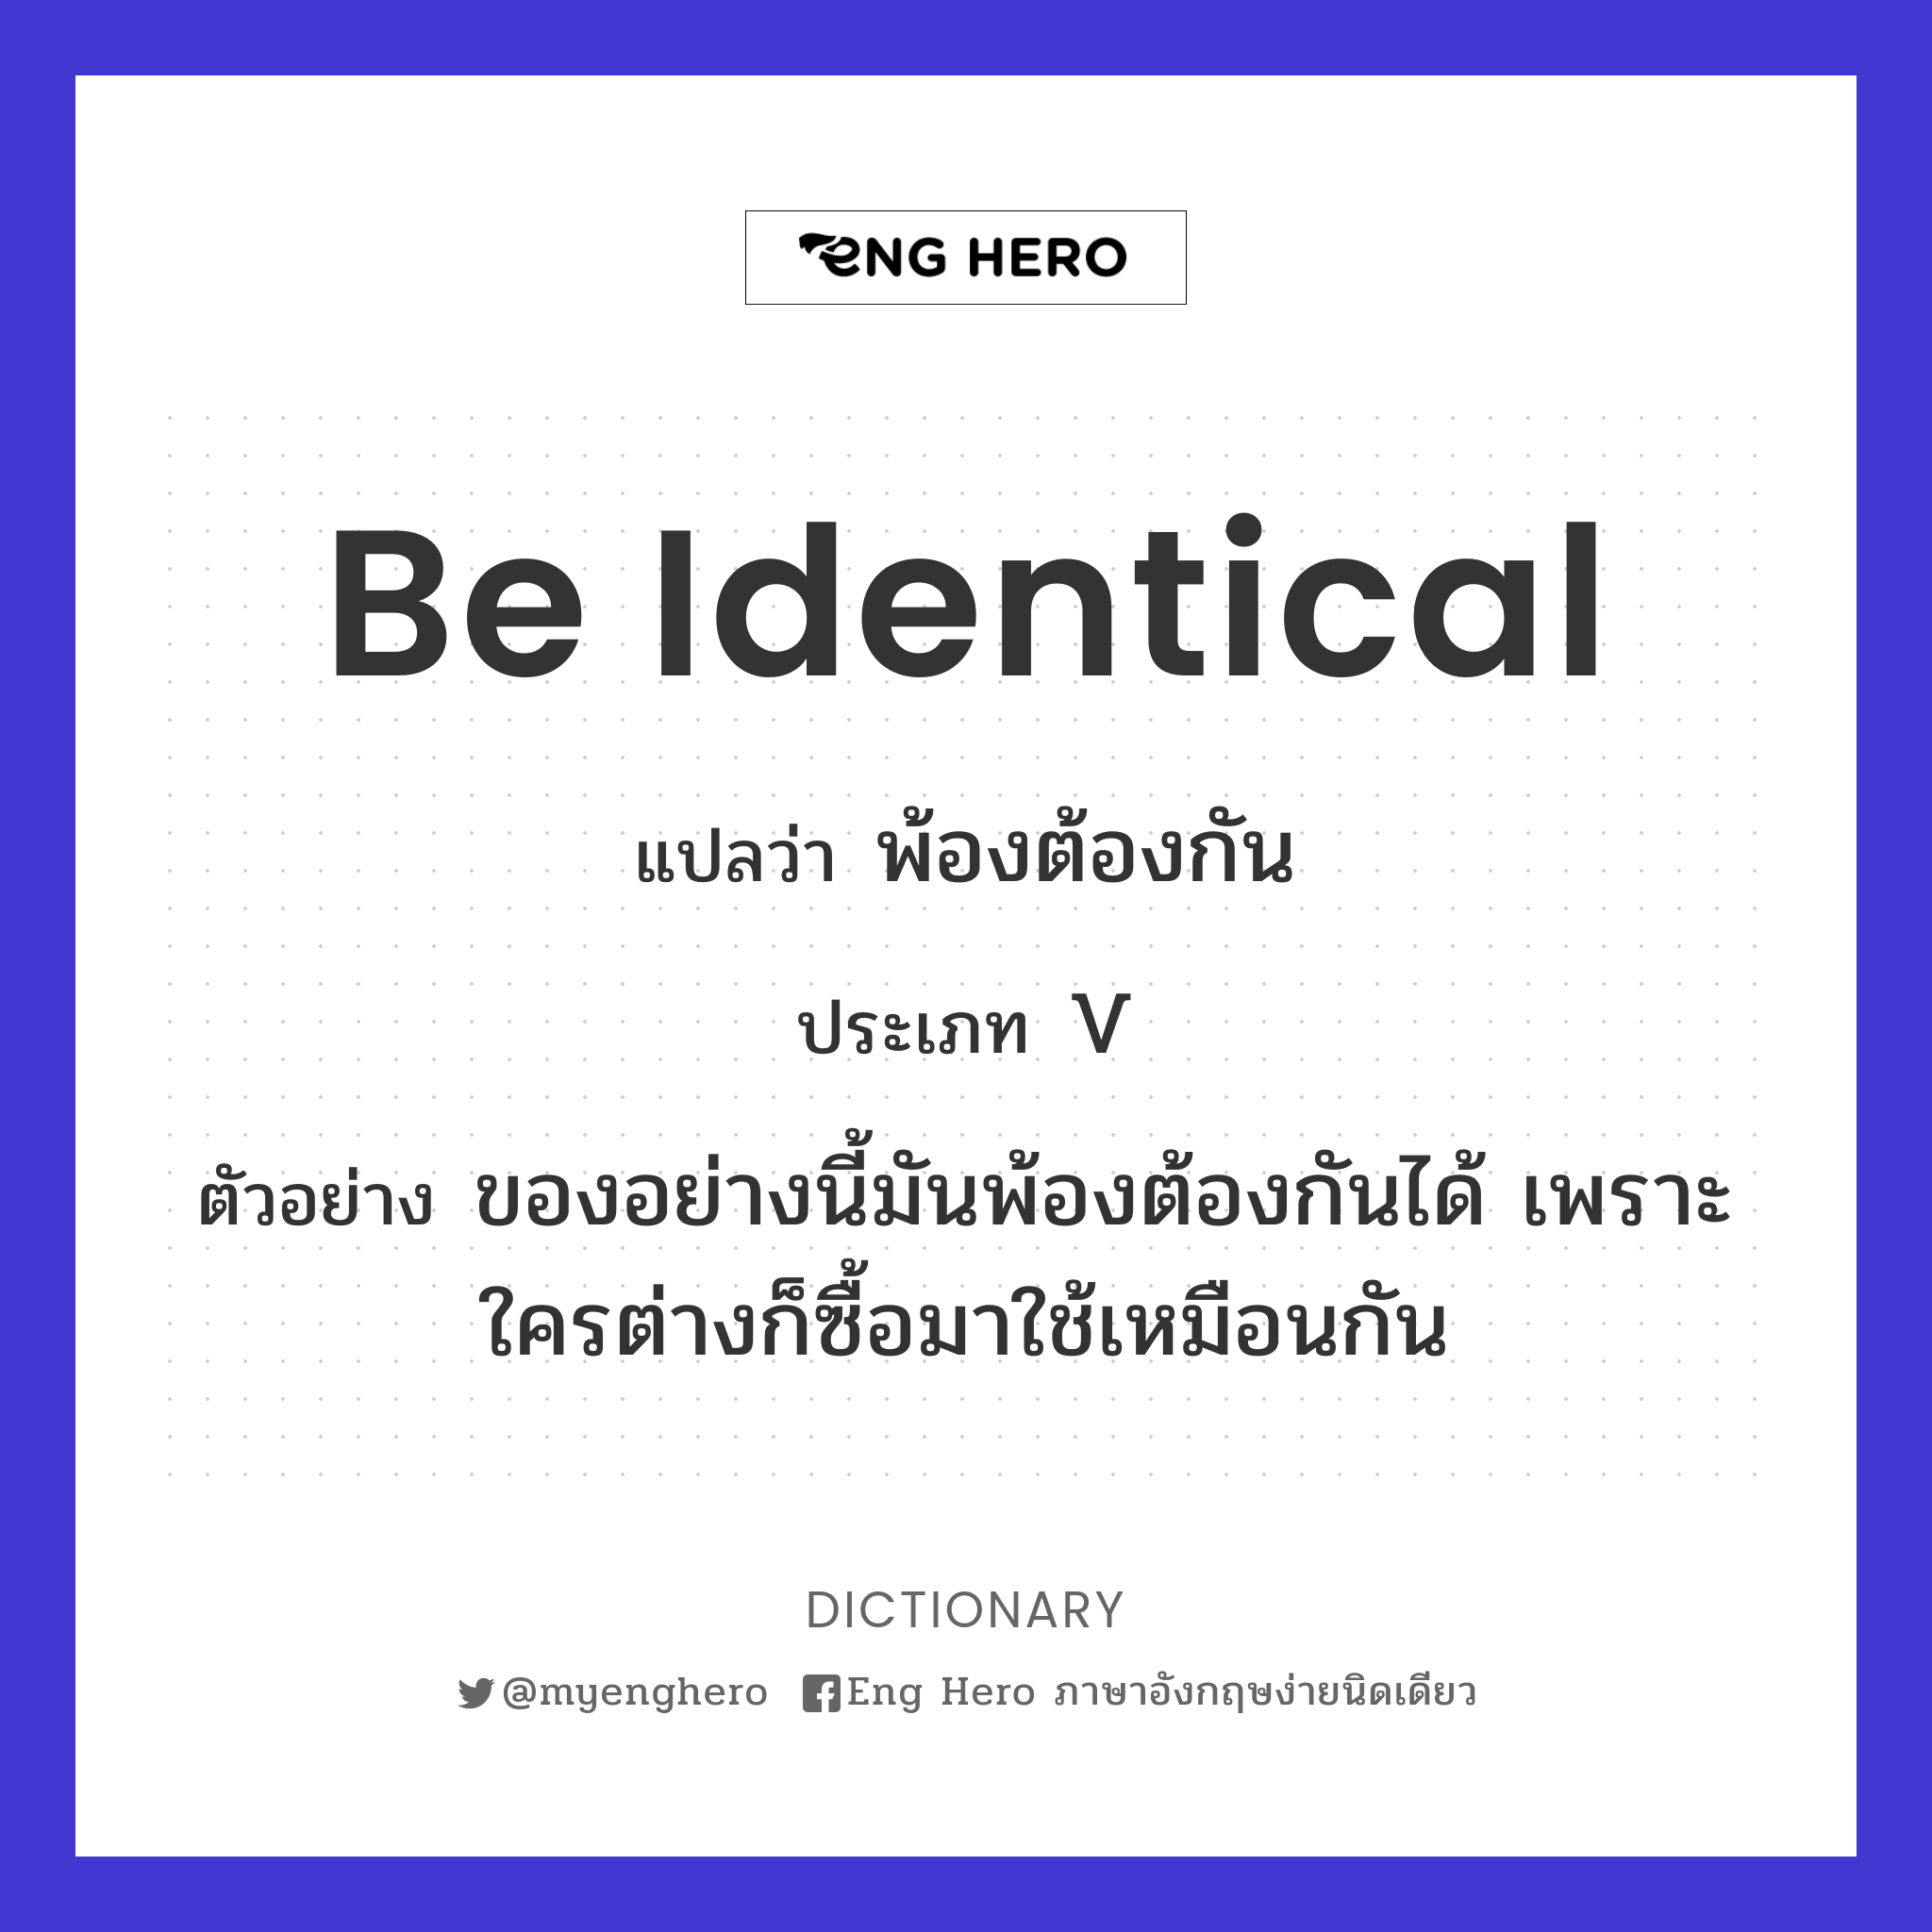 be identical